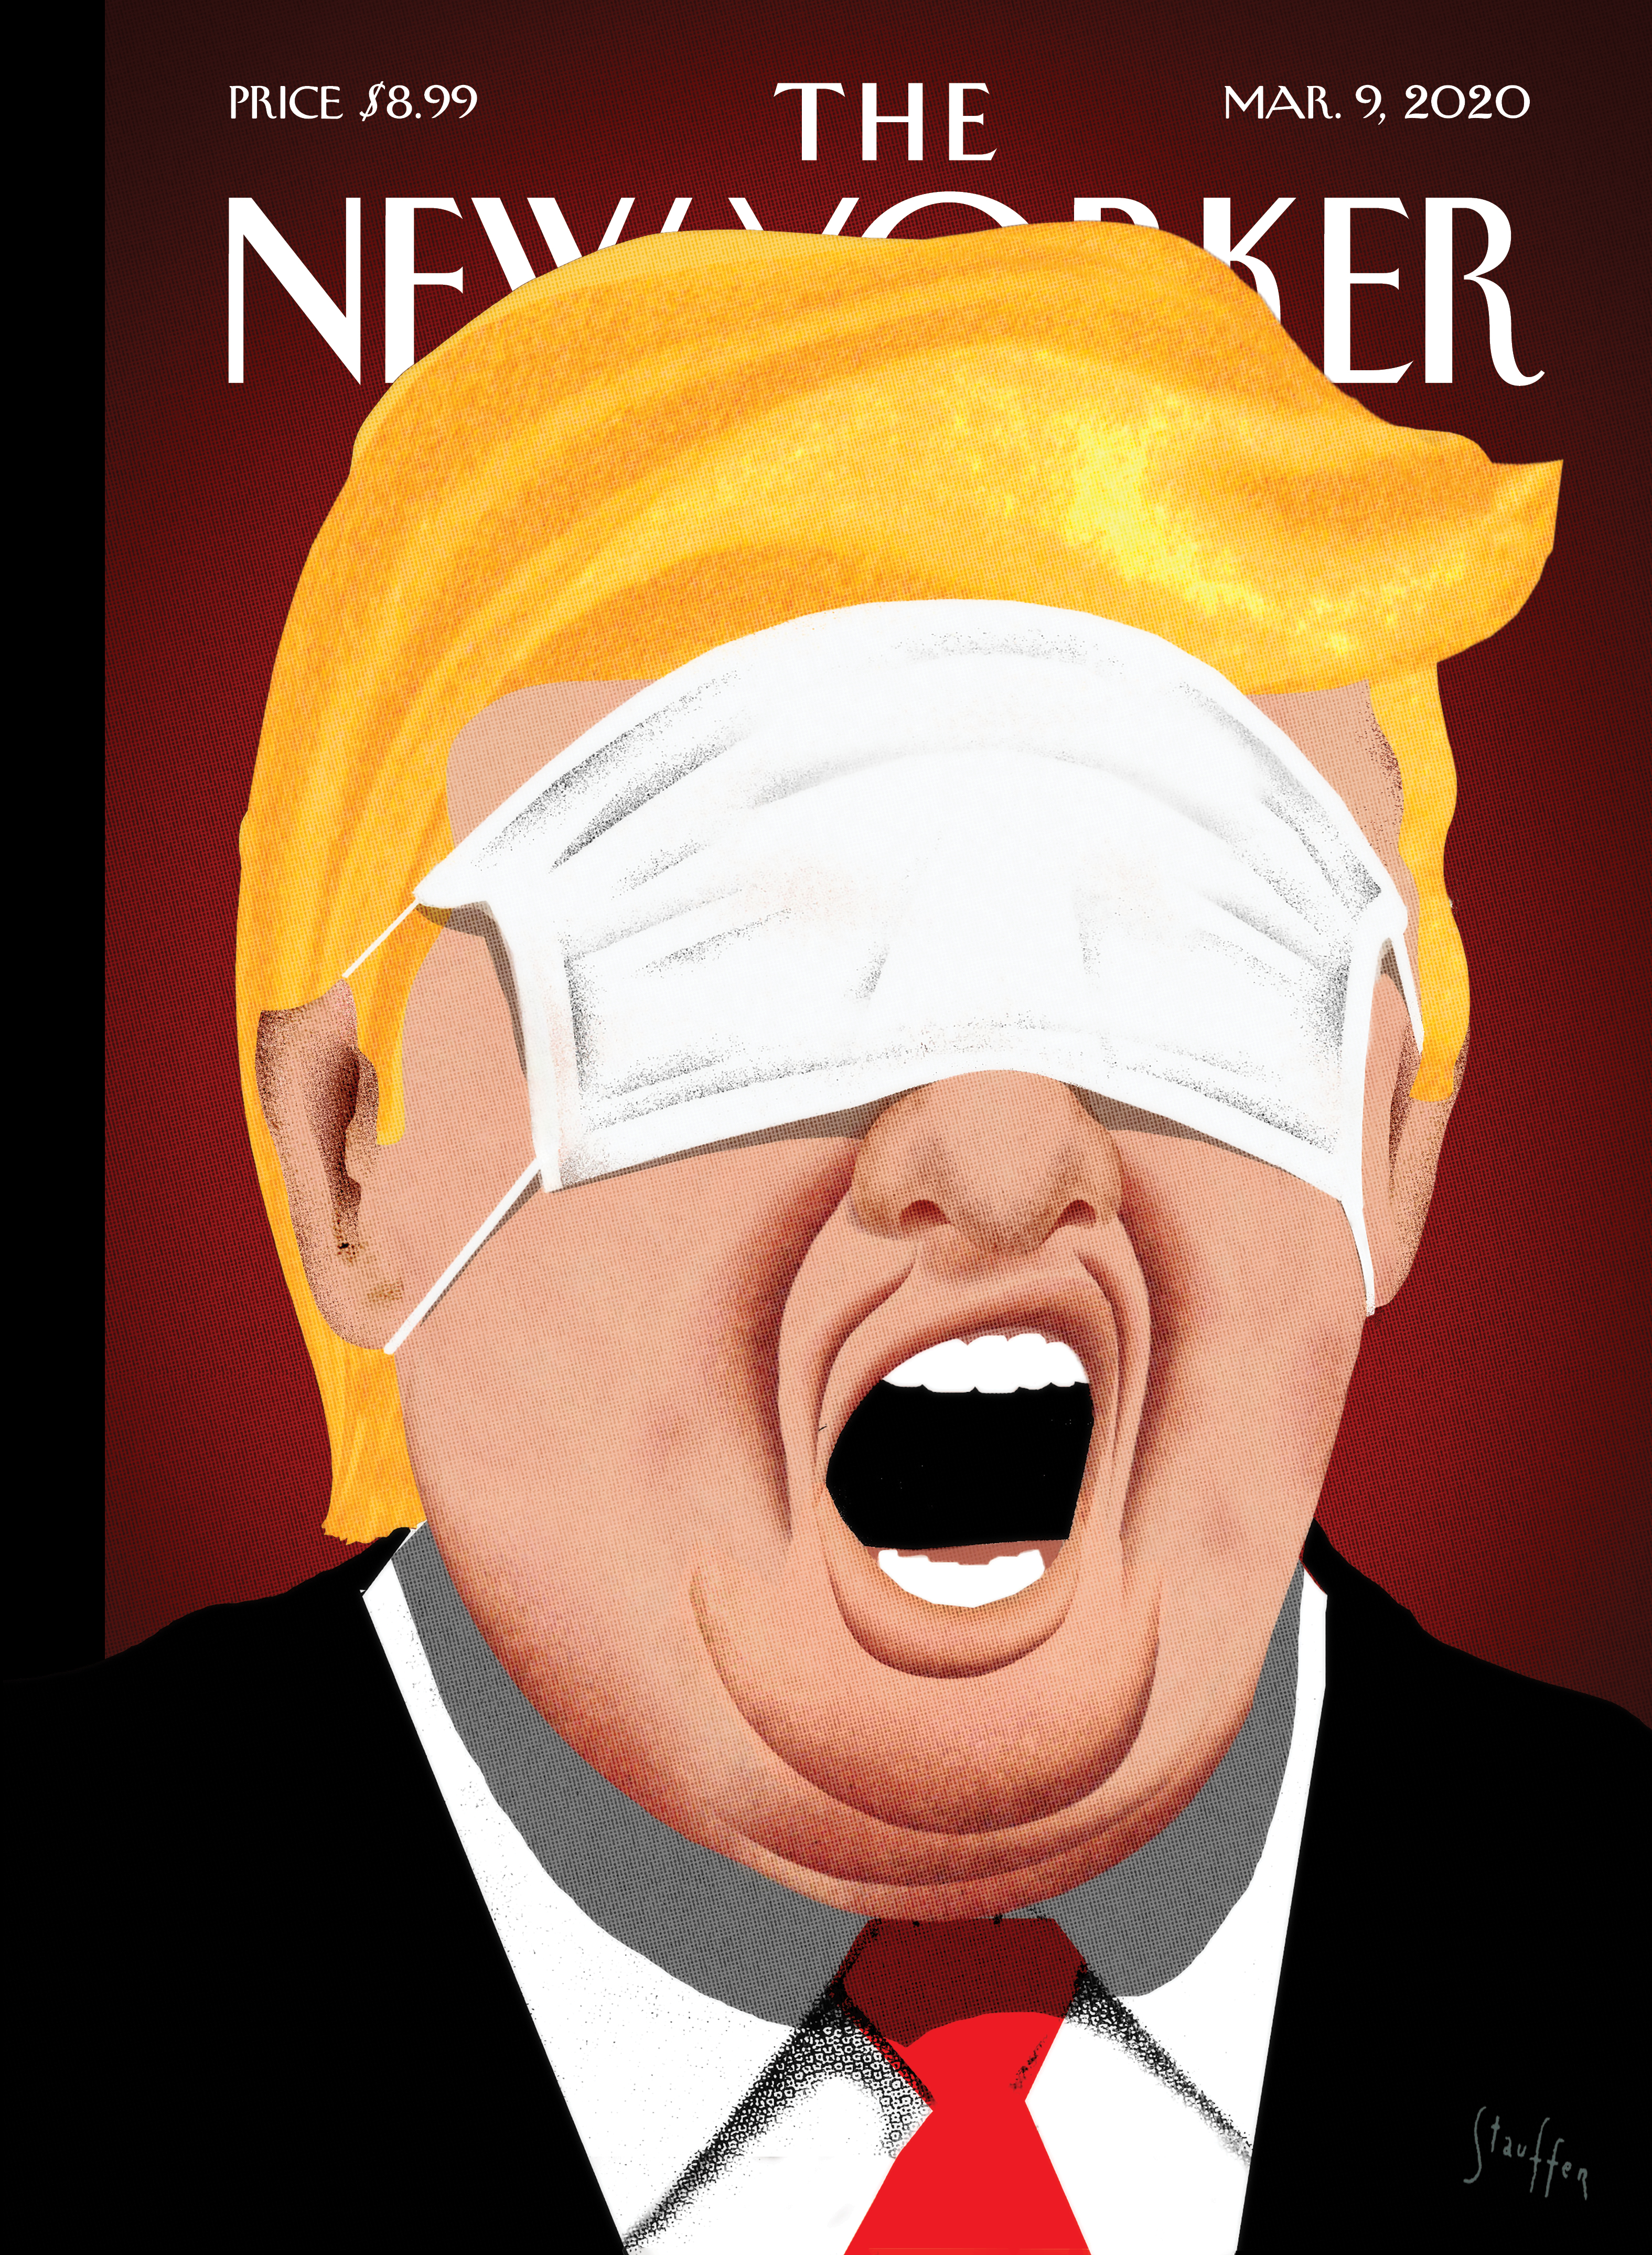 The New Yorker - Most Controversial Cover